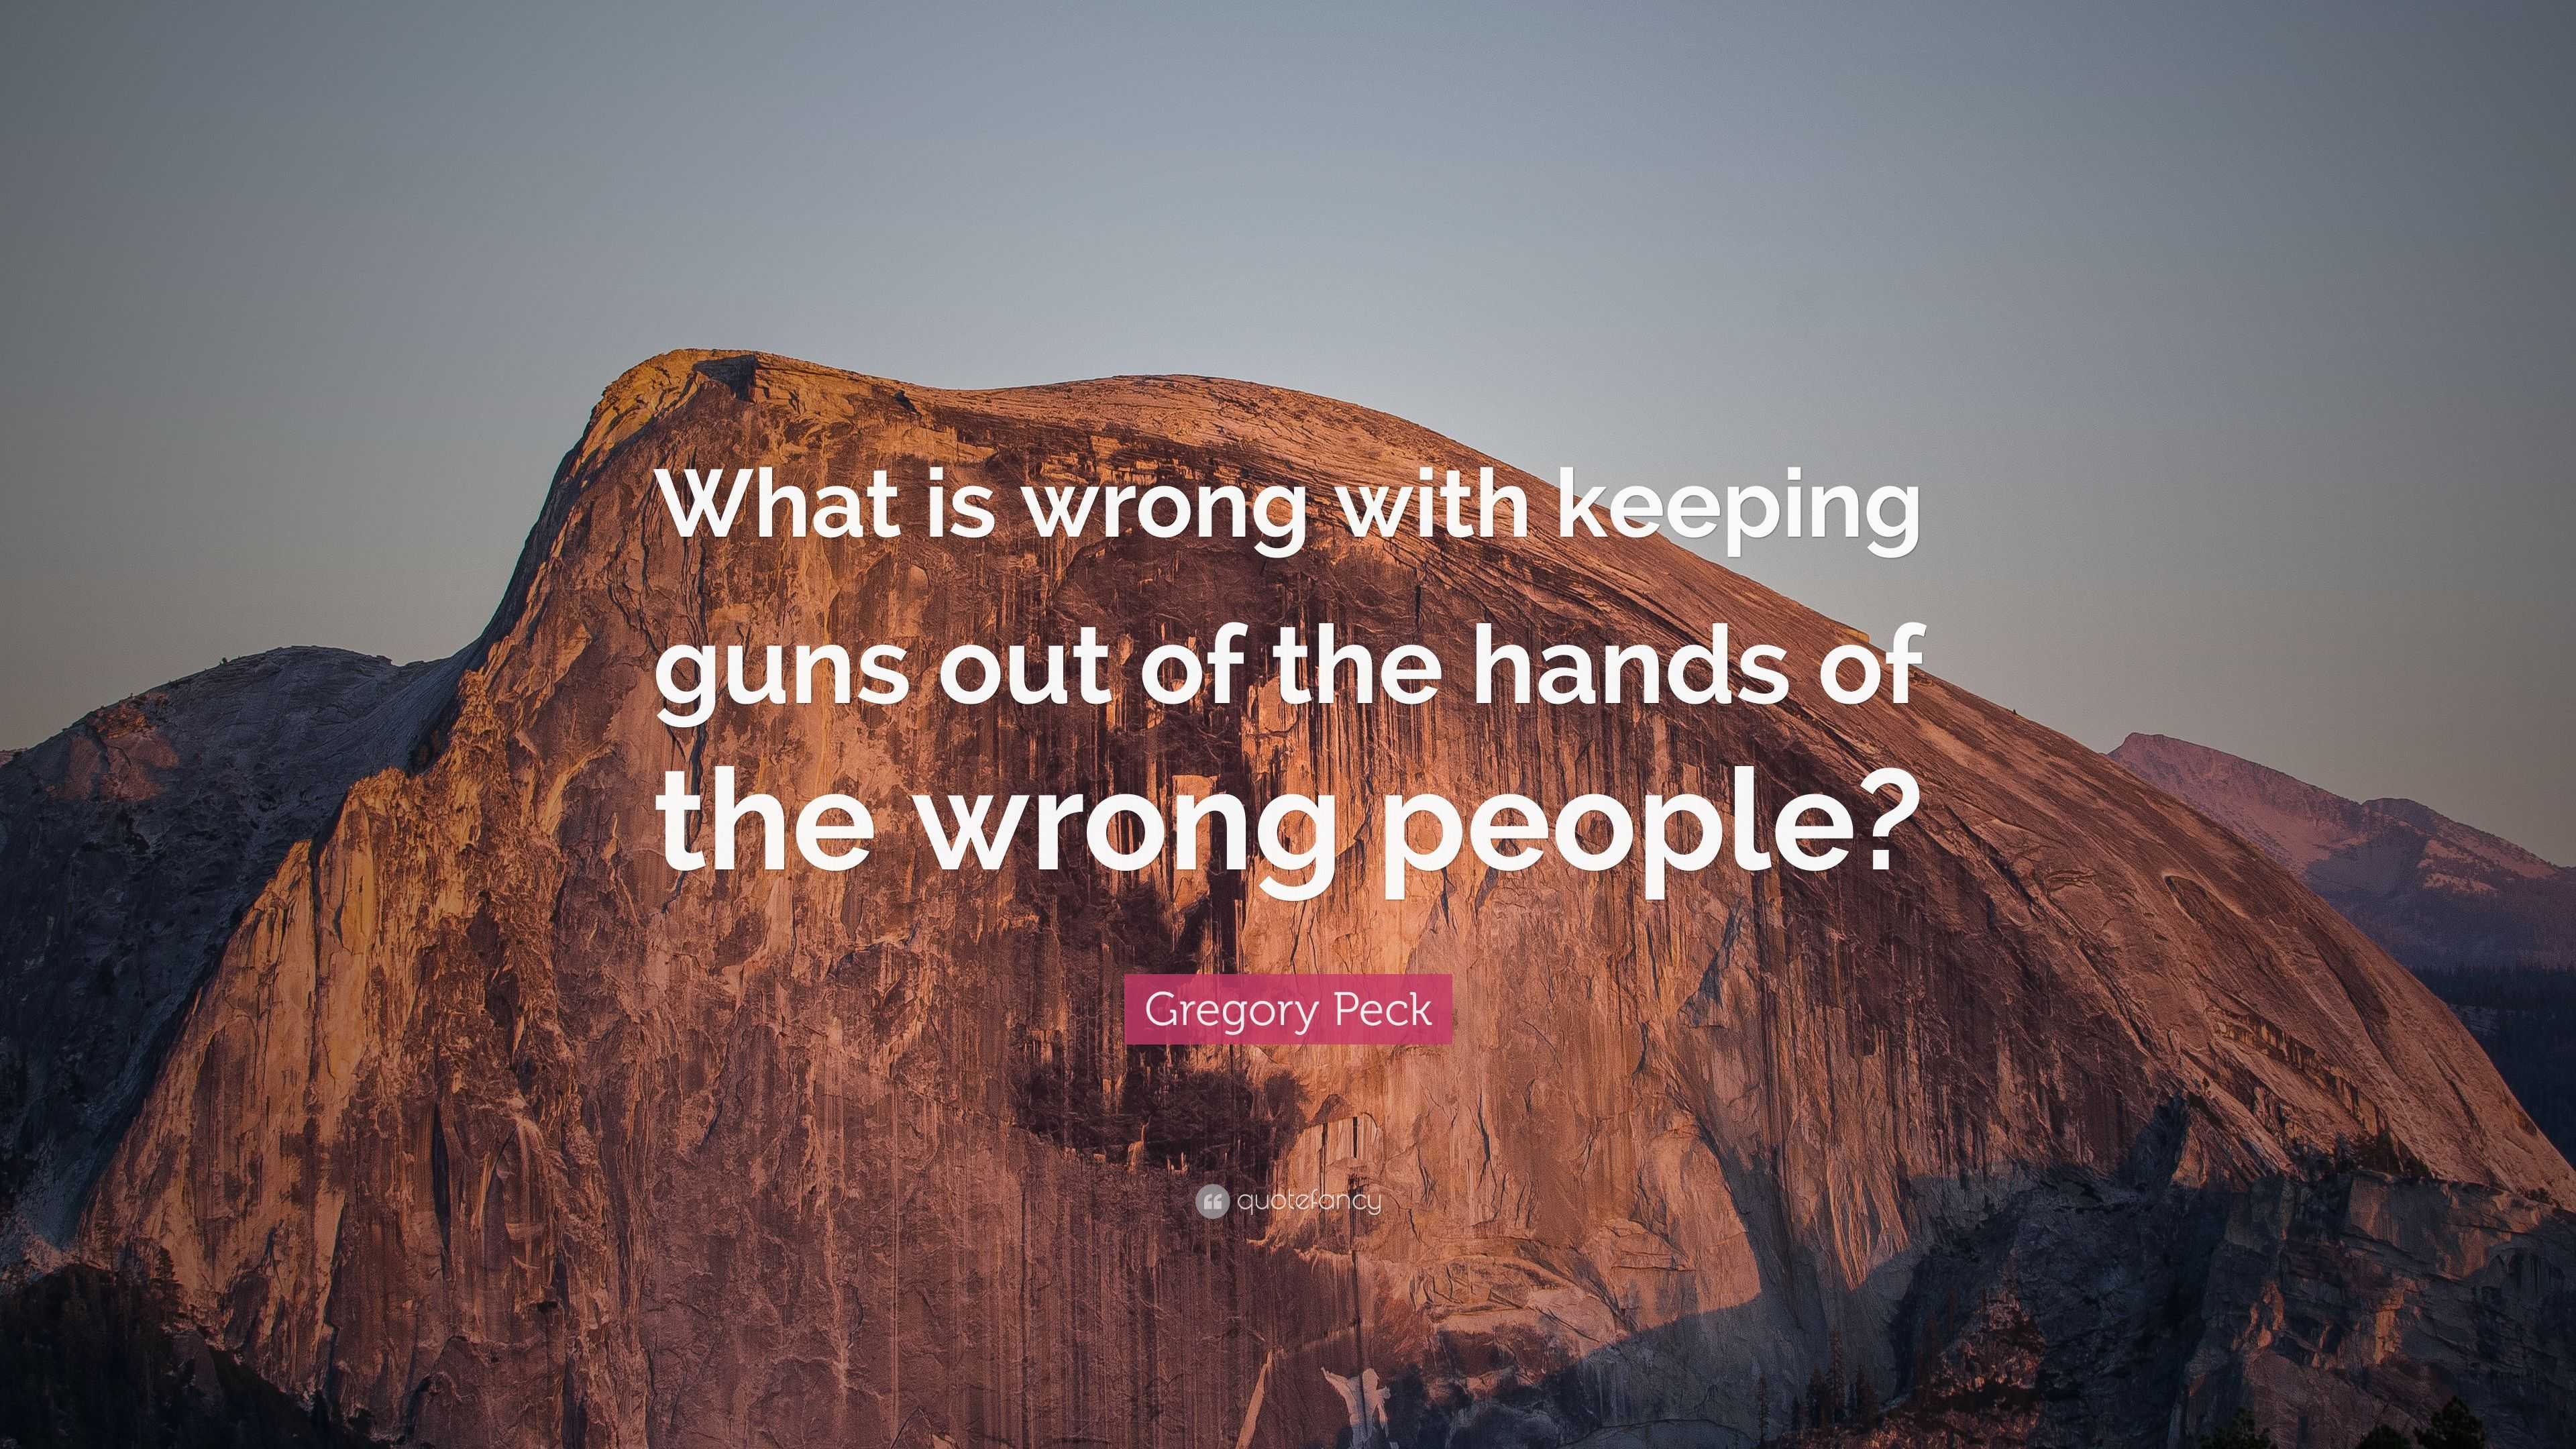 Gregory Peck Quote “what Is Wrong With Keeping Guns Out Of The Hands Of The Wrong People” 3209